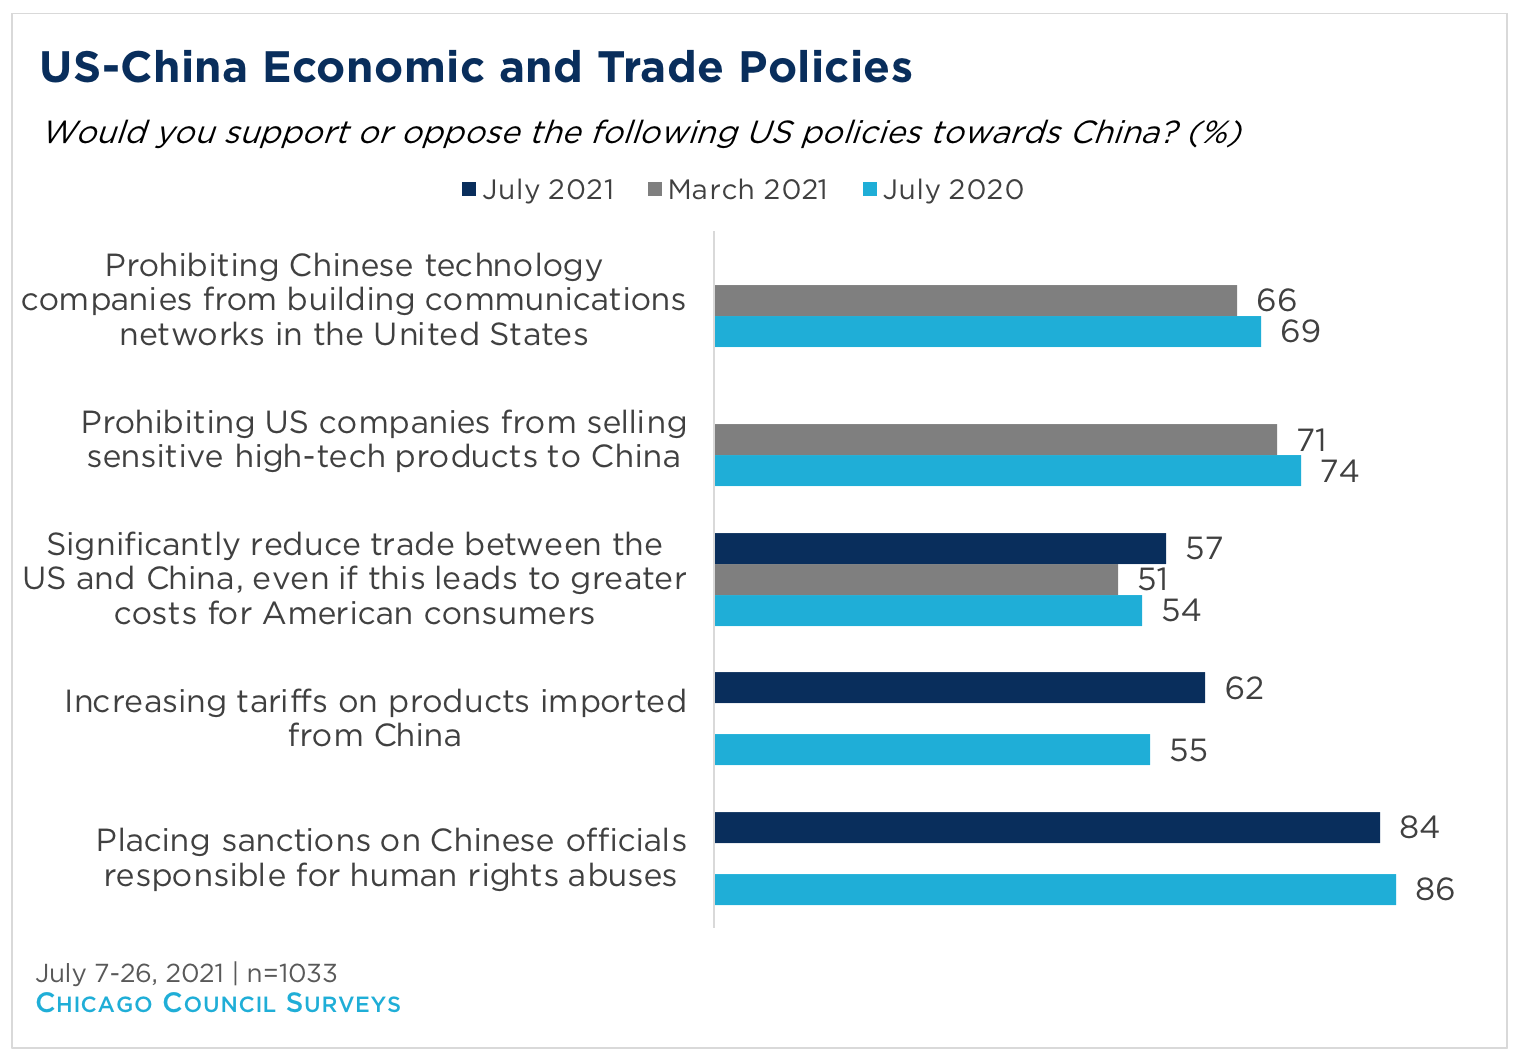 Bar graph showing public support of US-China economic and trade policies